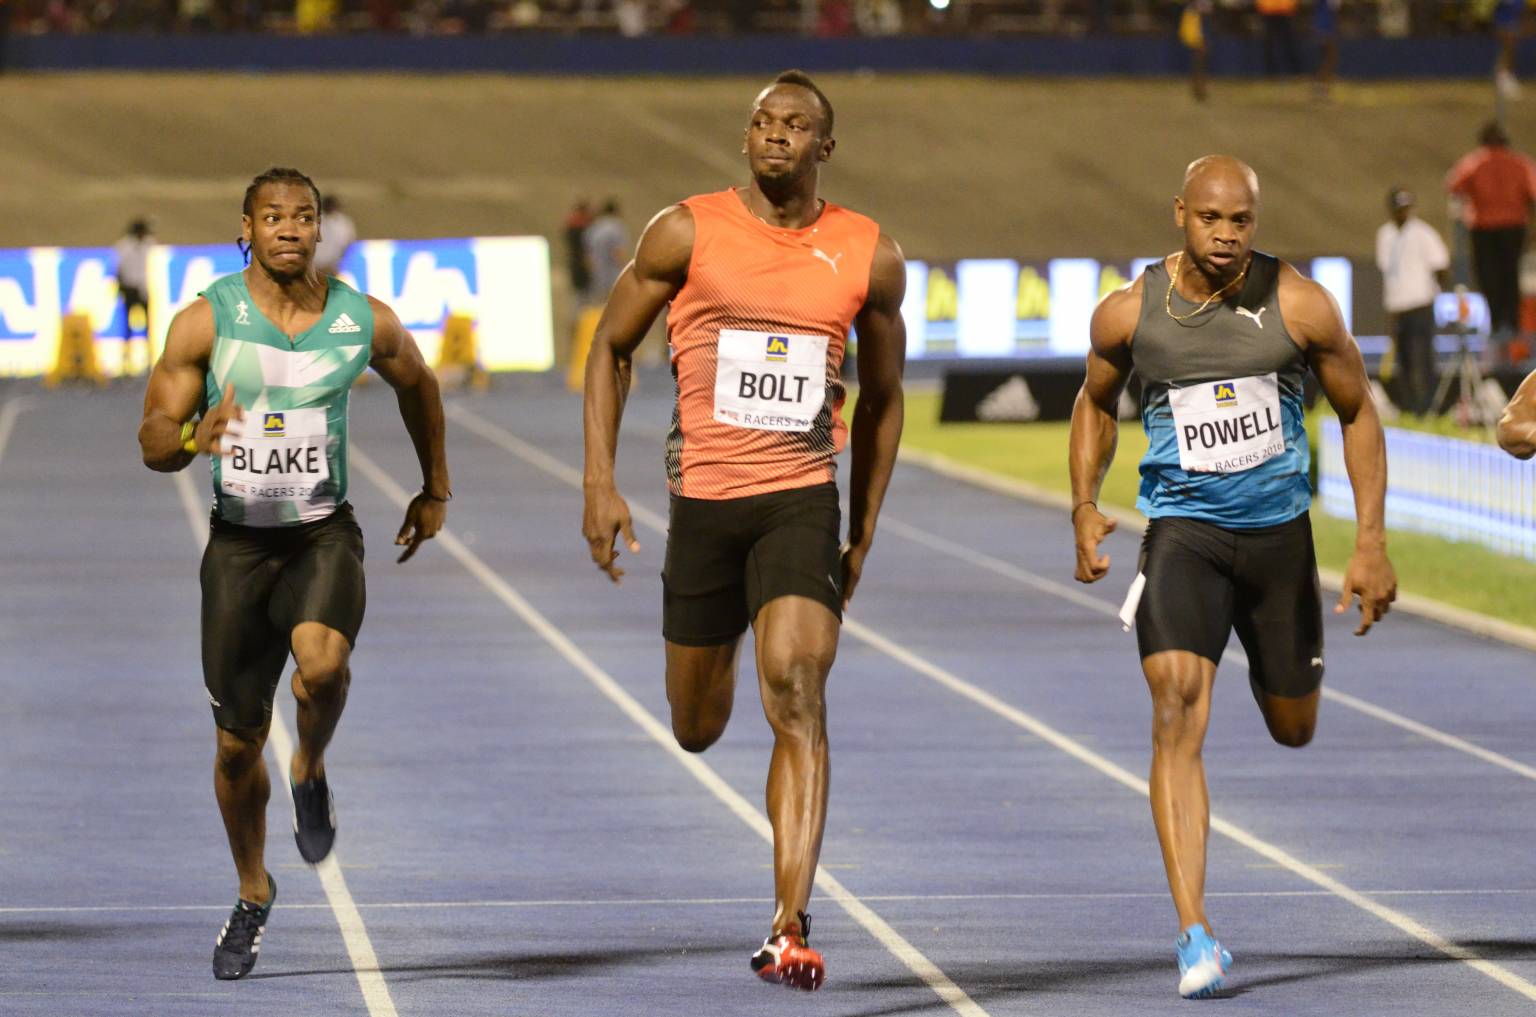 Statues of Bolt, Fraser-Pryce, VCB and Powell to be erected at National Stadium